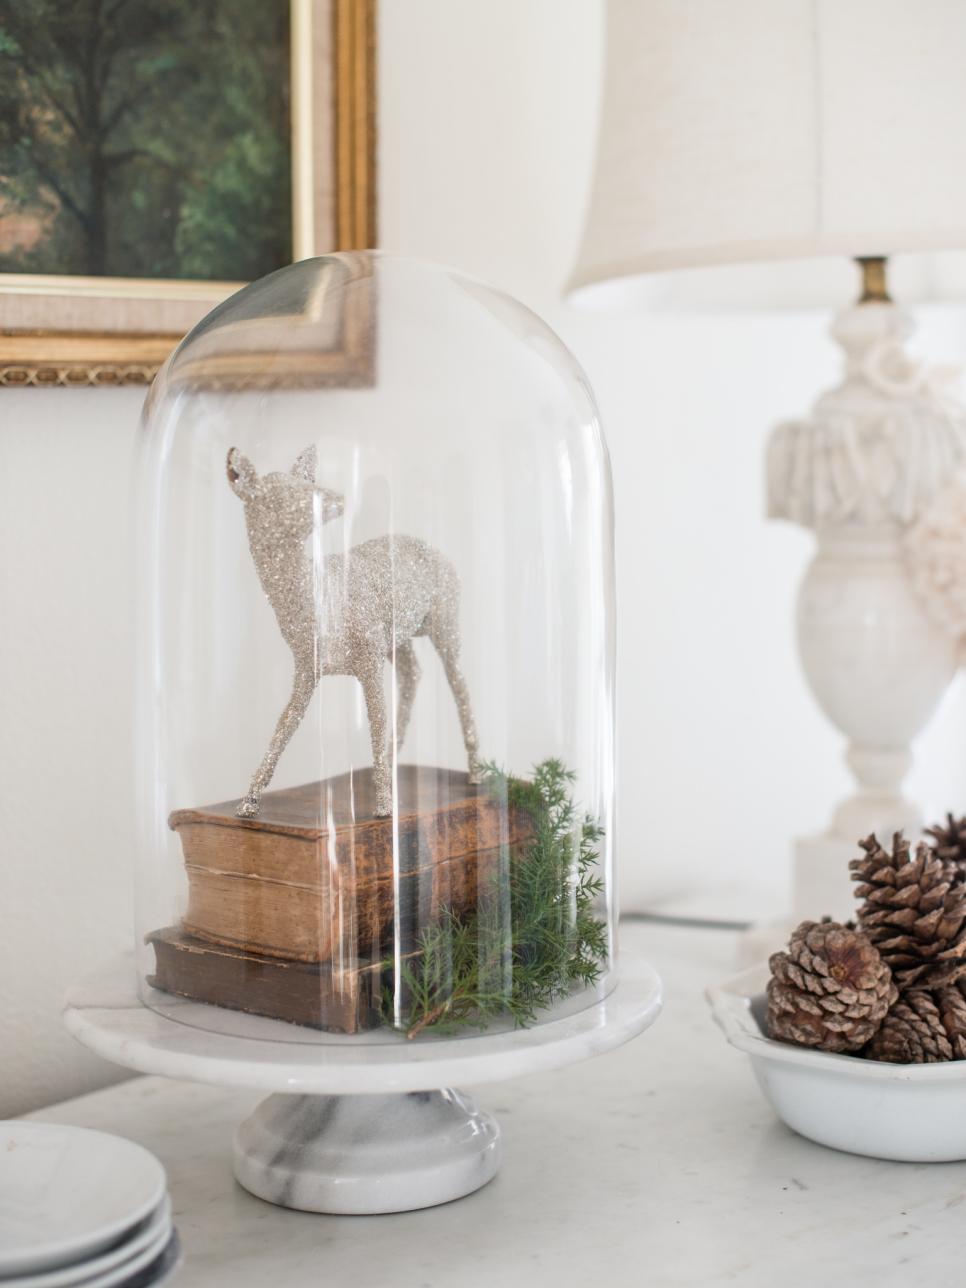 Low-Cost Christmas Decorations You Can Make Yourself